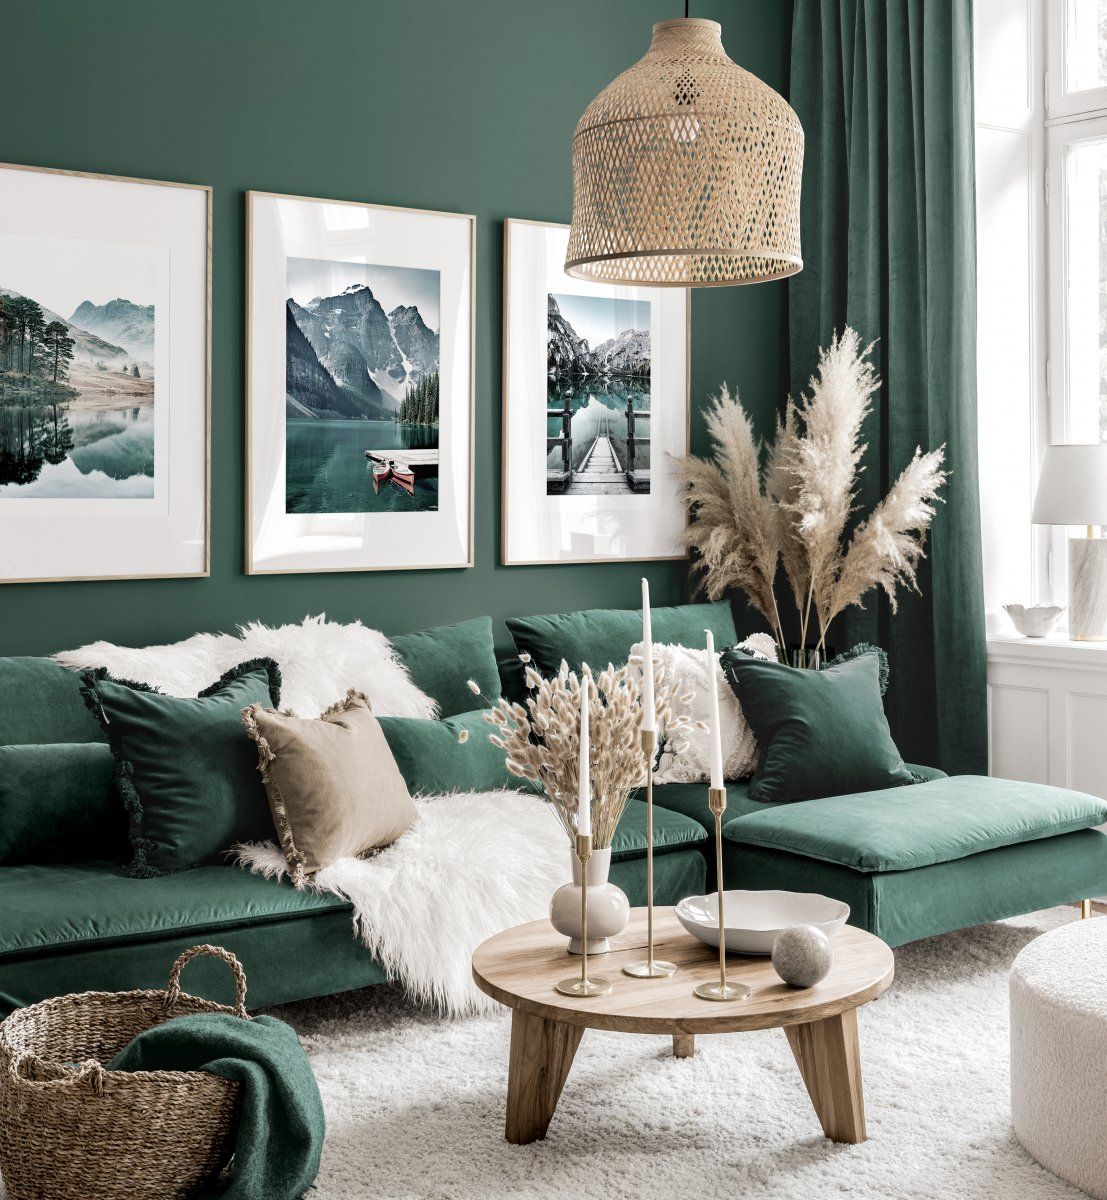 Bring Life To Your Living Room With Color